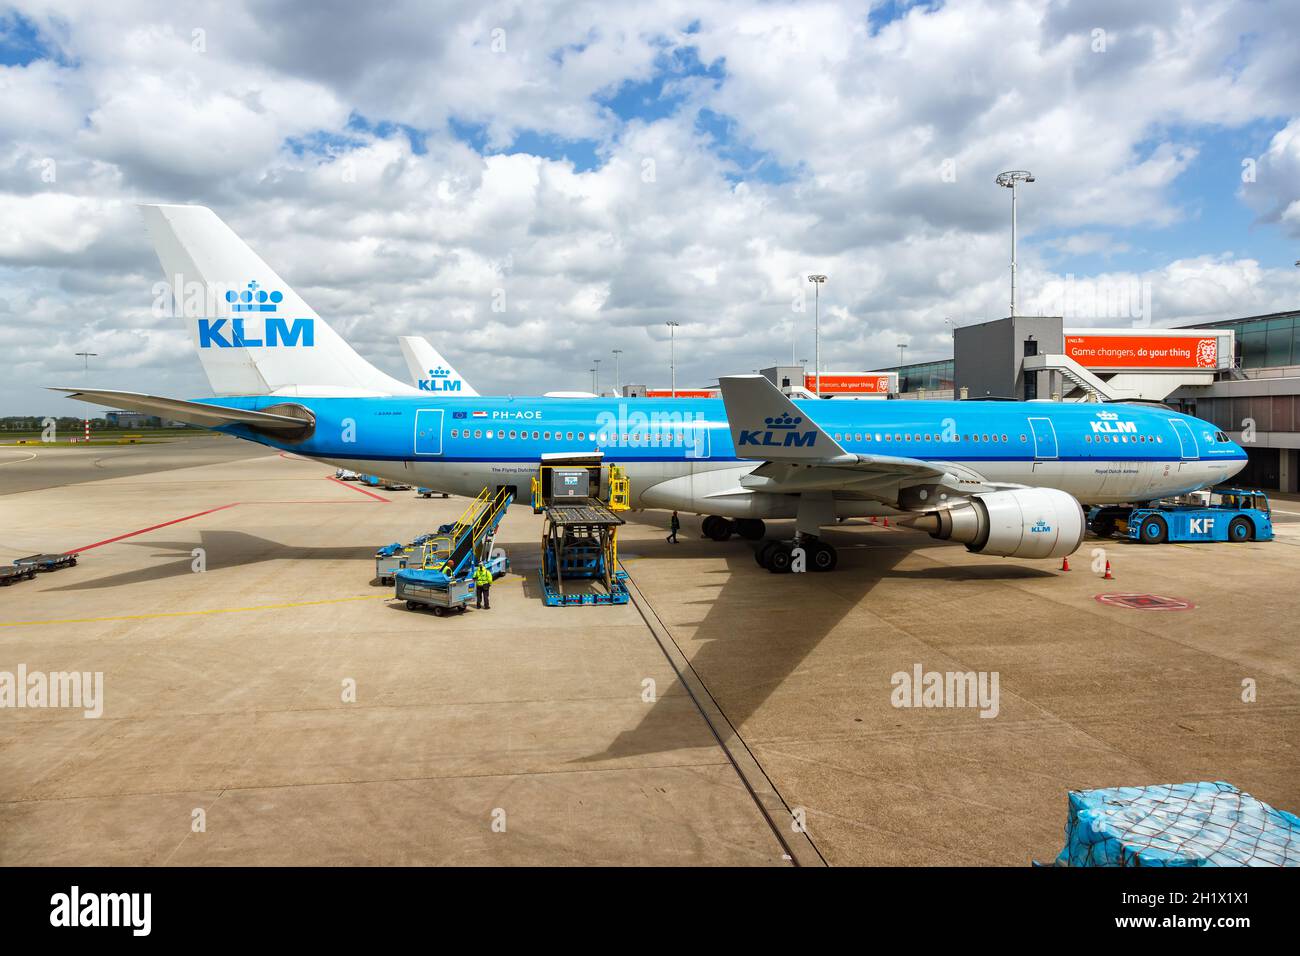 Amsterdam, Netherlands - May 21, 2021: KLM Royal Dutch Airlines Airbus A330-200 airplane at Amsterdam Schiphol airport (AMS) in the Netherlands. Stock Photo